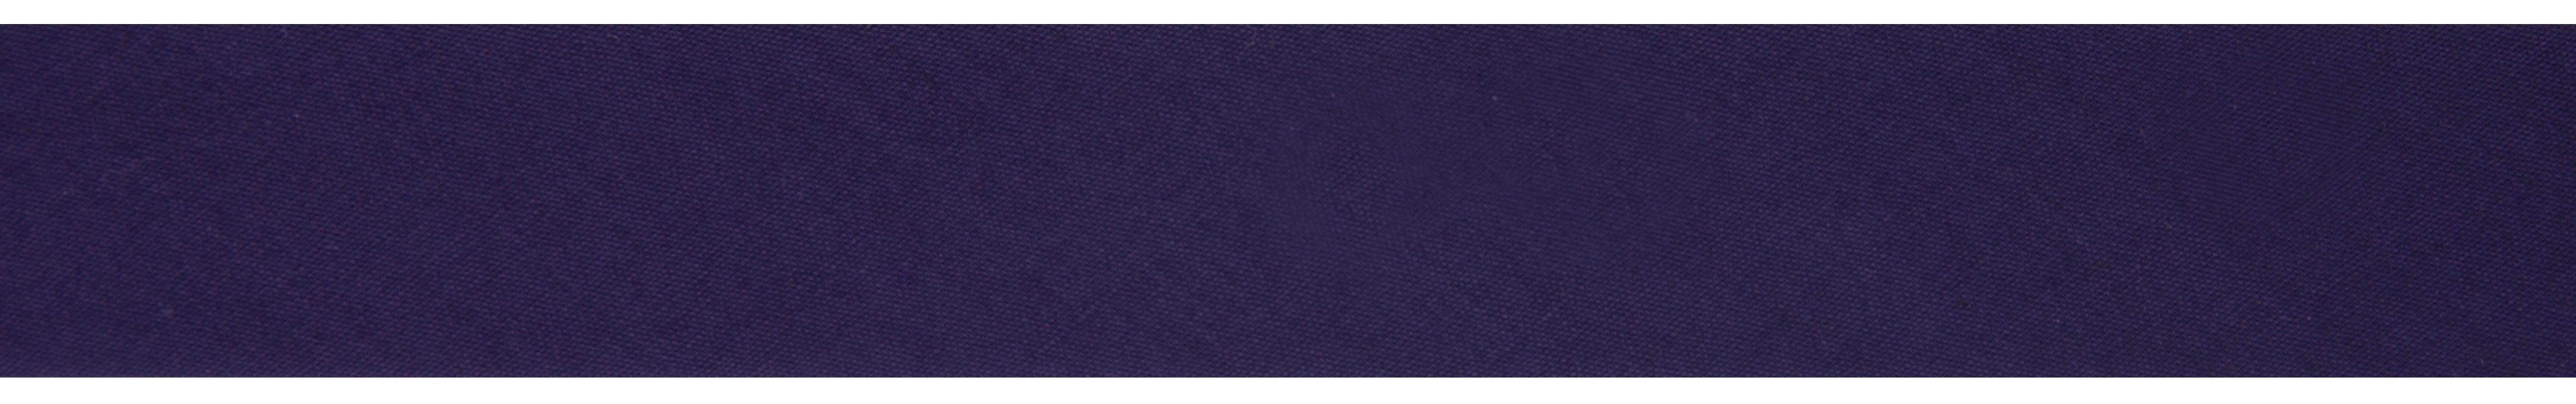 20m roll of Purple Bias Binding | 25mm width from Jaycotts Sewing Supplies